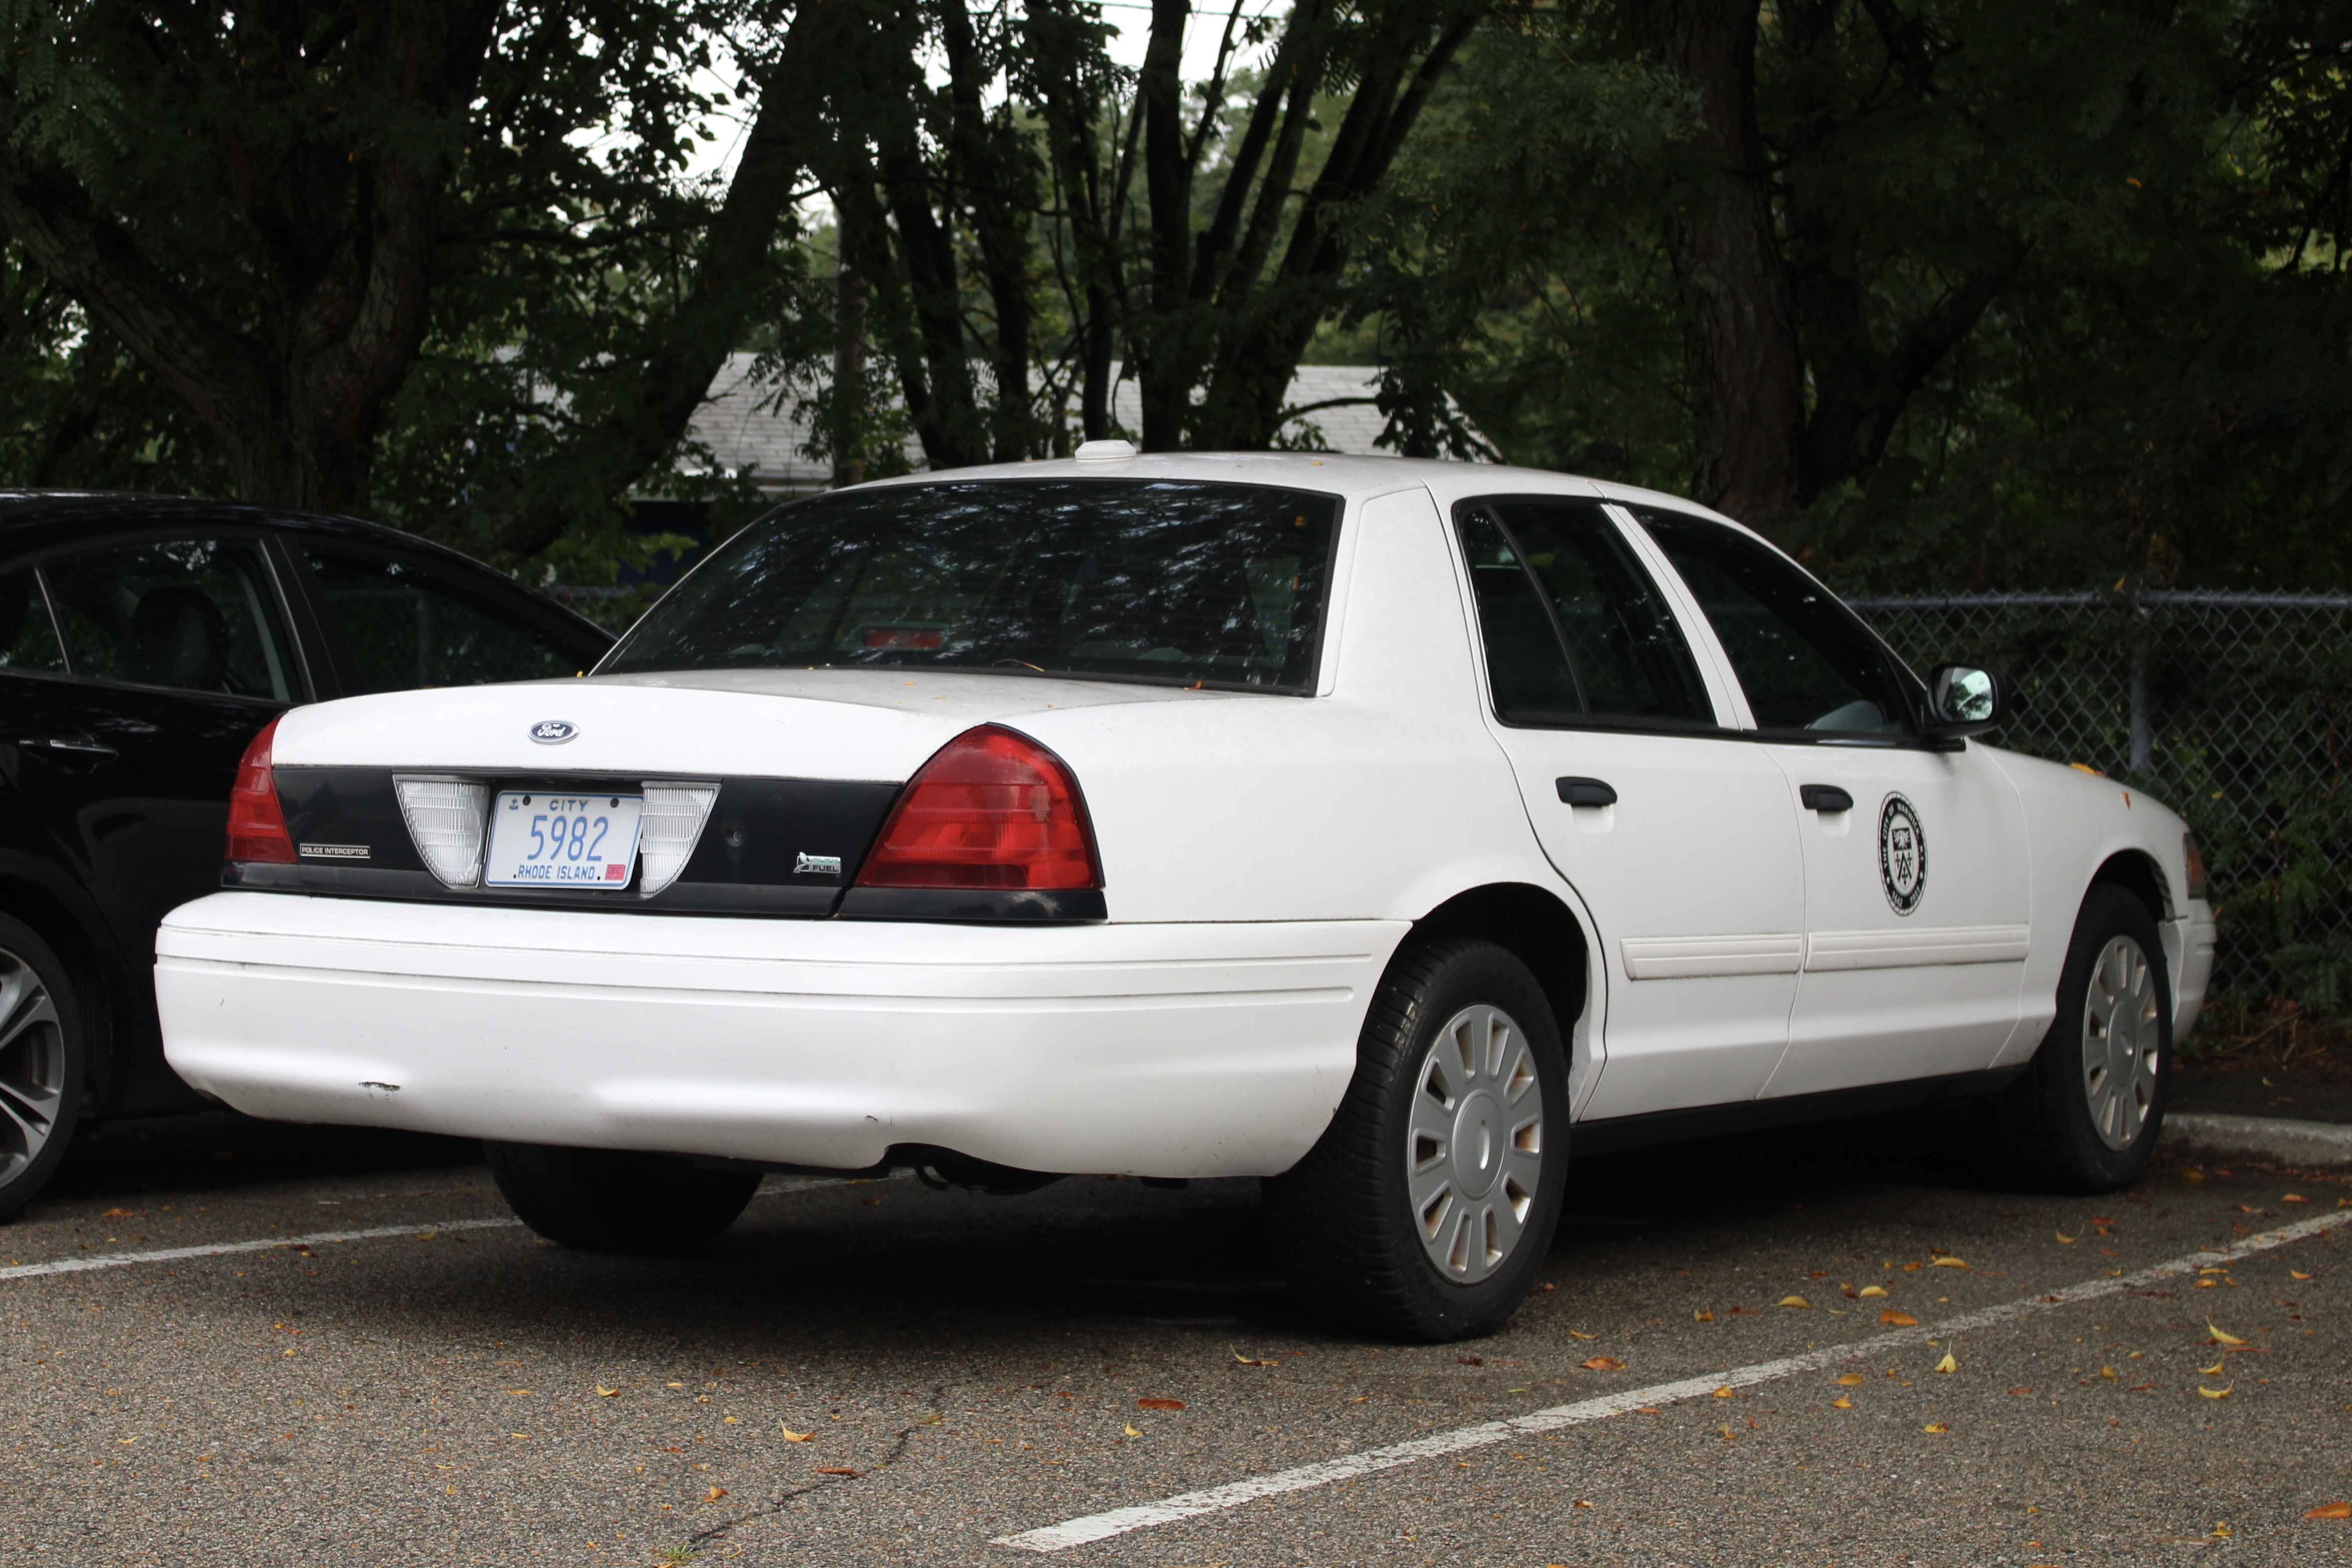 A photo  of Warwick Public Works
            Car 5982, a 2009-2011 Ford Crown Victoria Police Interceptor             taken by @riemergencyvehicles